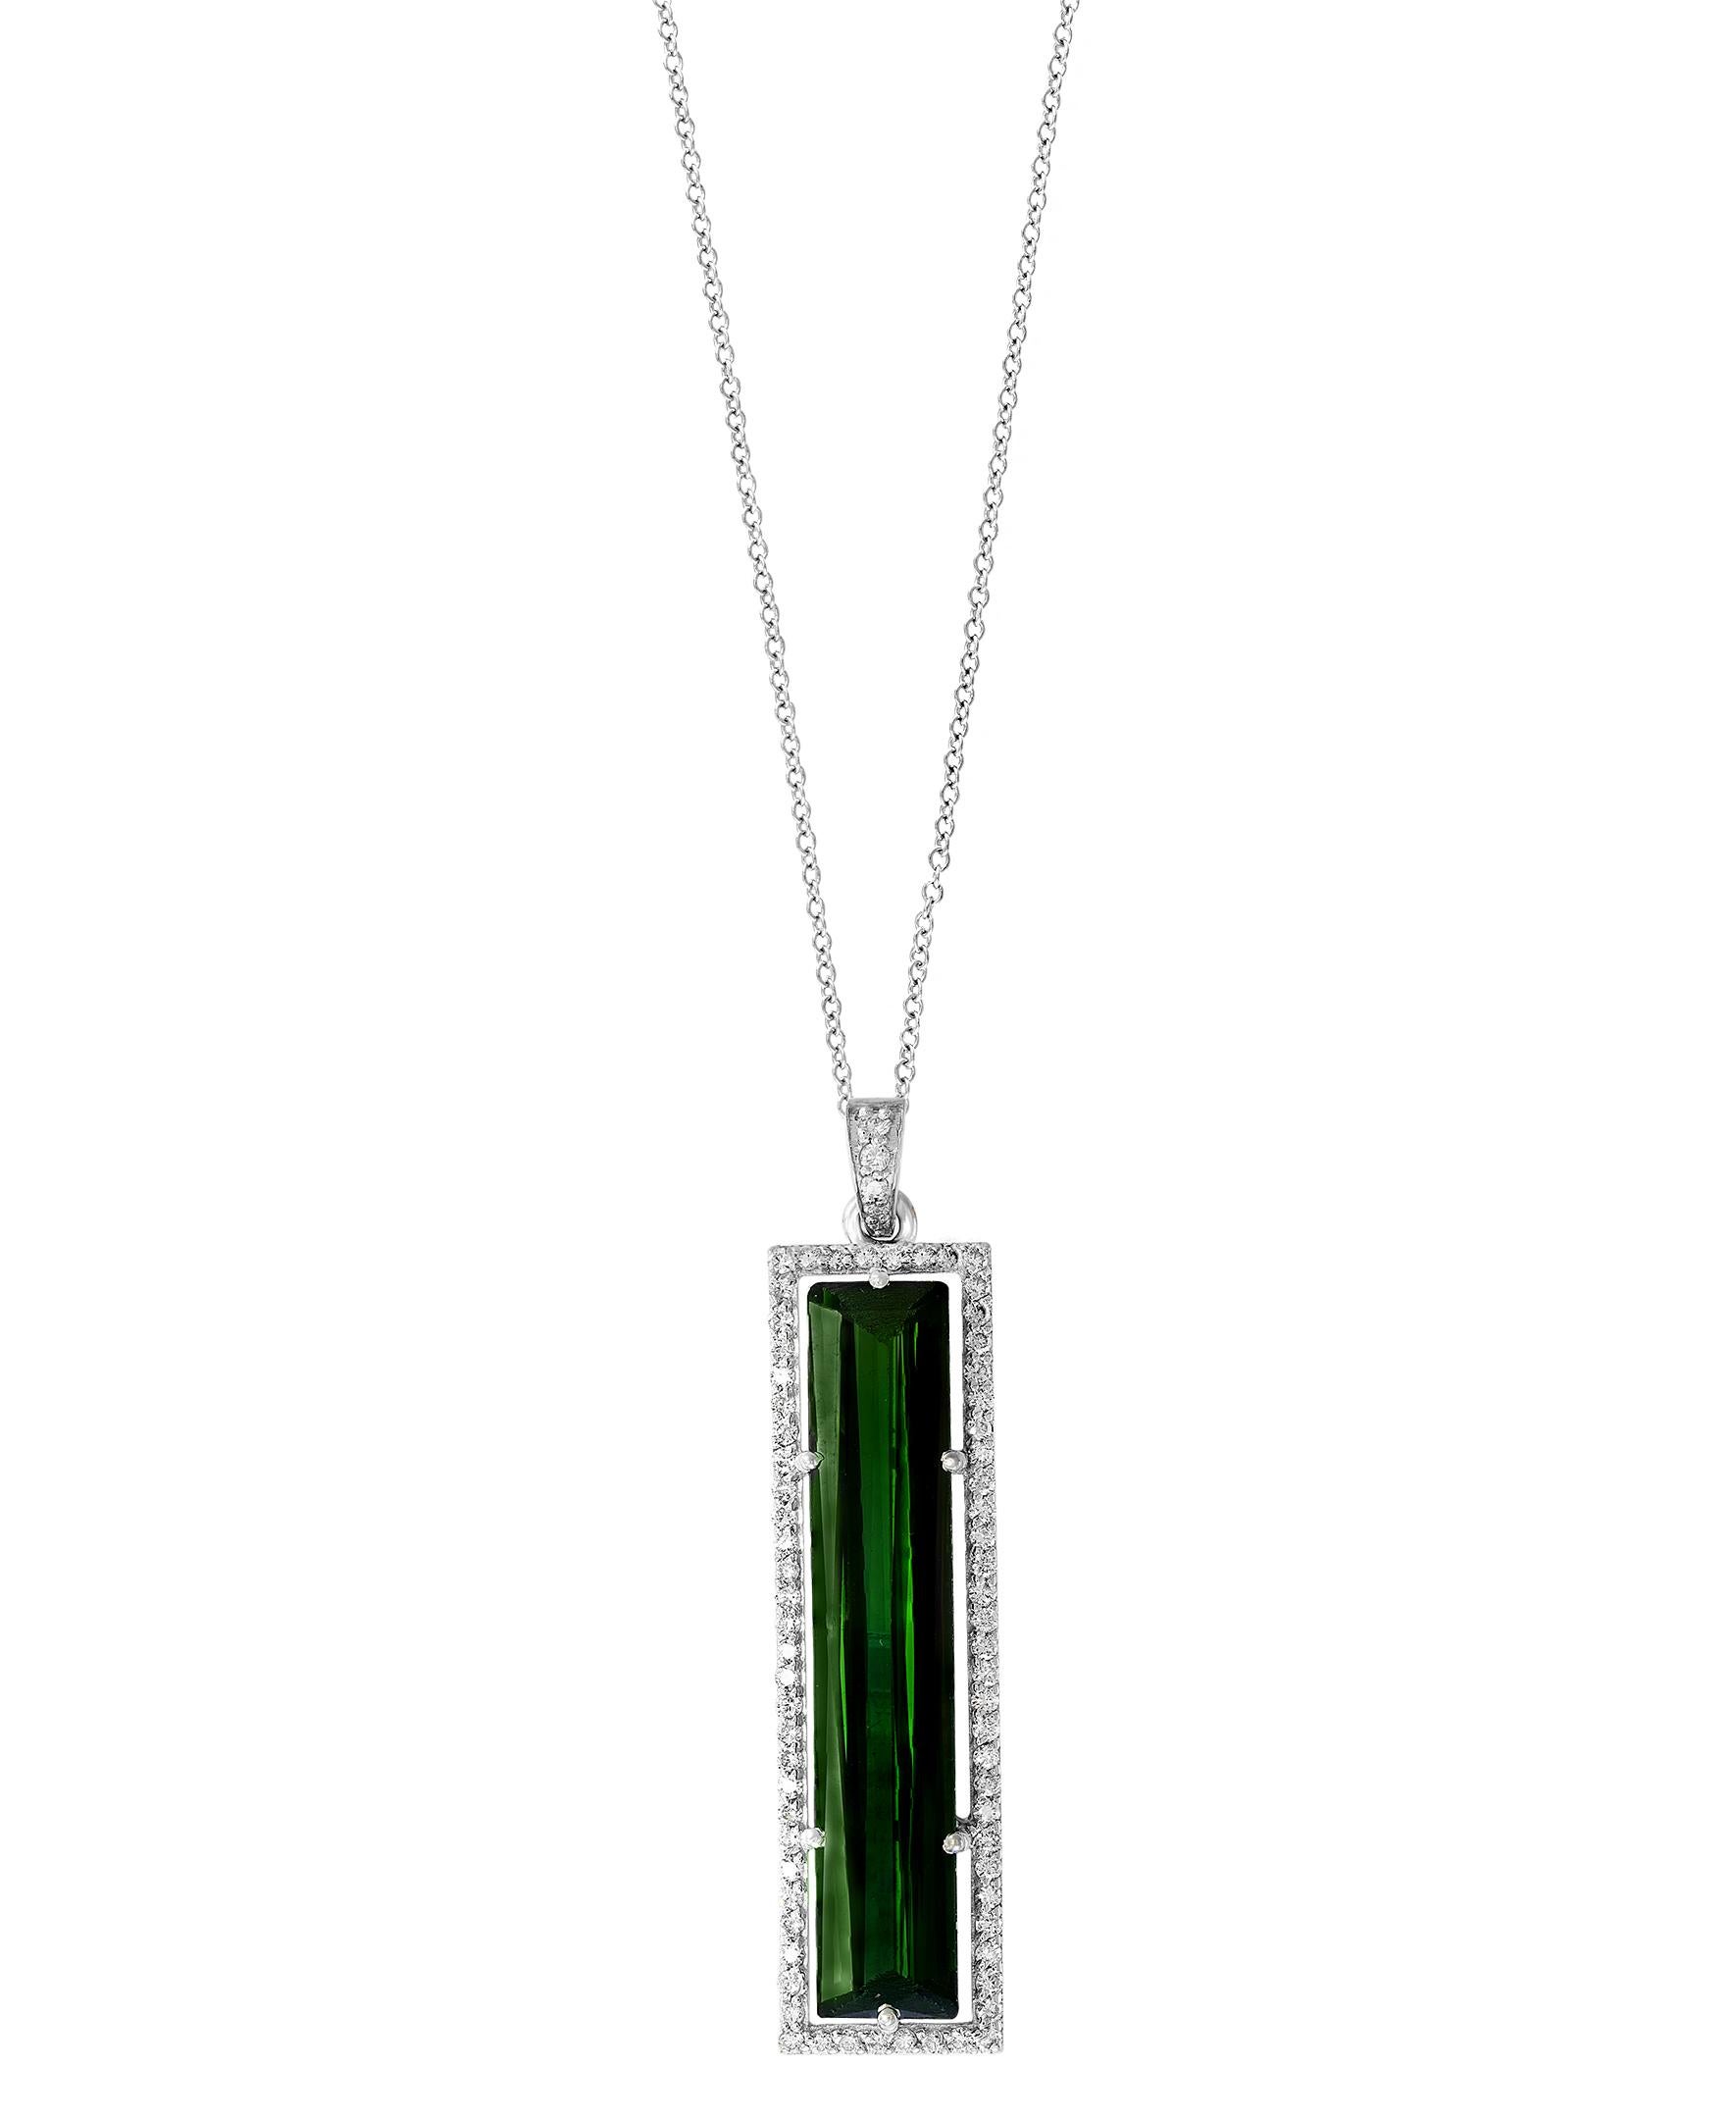   13 Carat Green Tourmaline  & Diamond Pendant /  Necklace 18 Karat  Gold.
This spectacular Pendant Necklace  consisting of a single long Cushion  Shape Green Tourmaline Approximately   13 Carat.  The  Green Tourmaline  is surrounded by